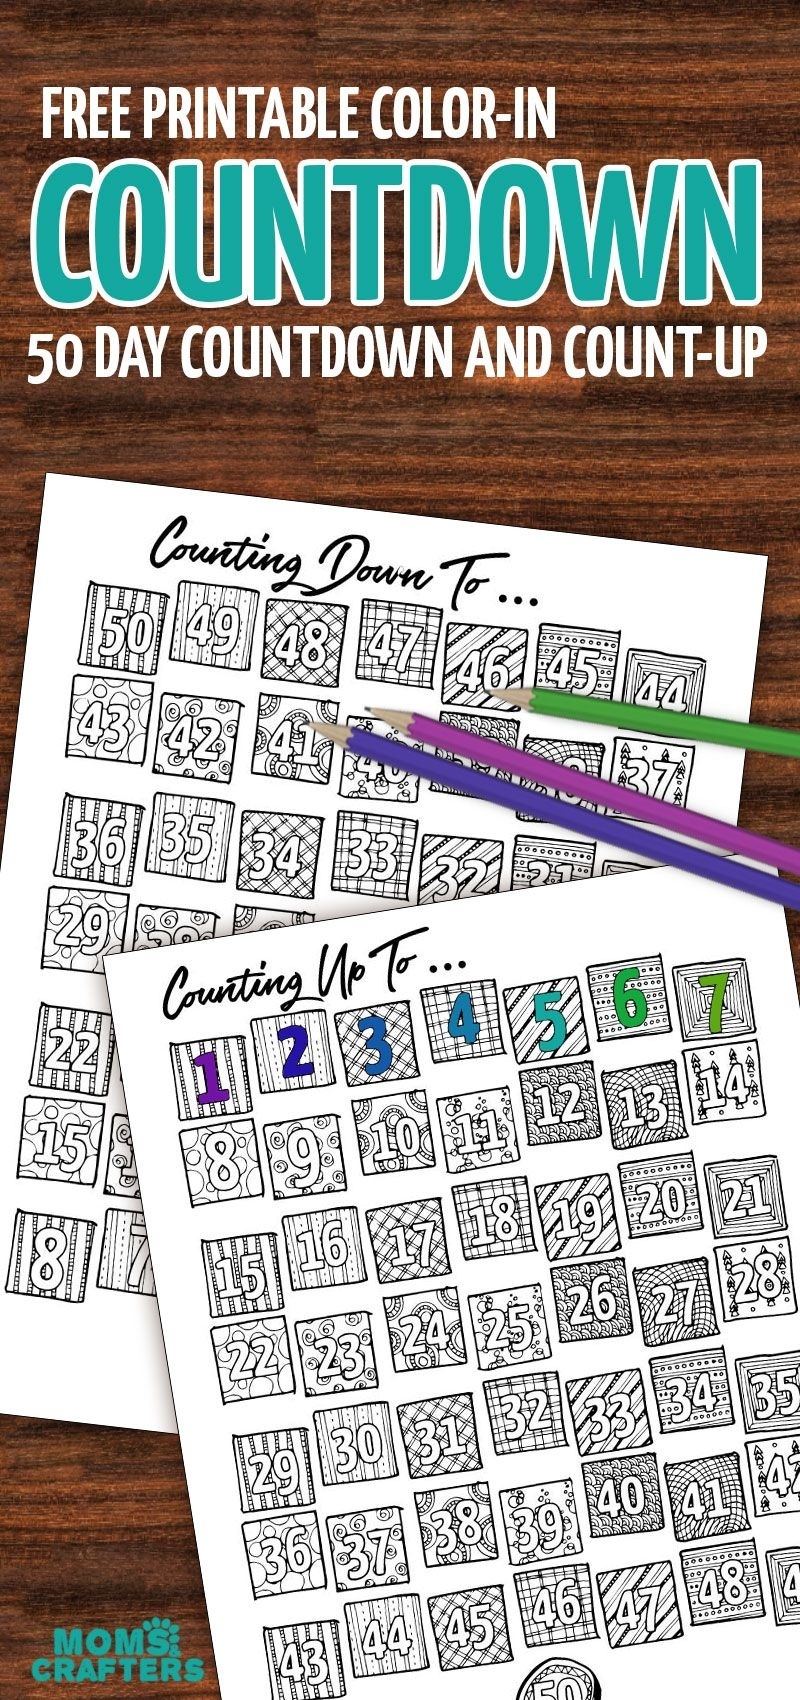 Grab This Fun Color-In Countdown And Progress Tracker Free Printable Countdown Calendar Template